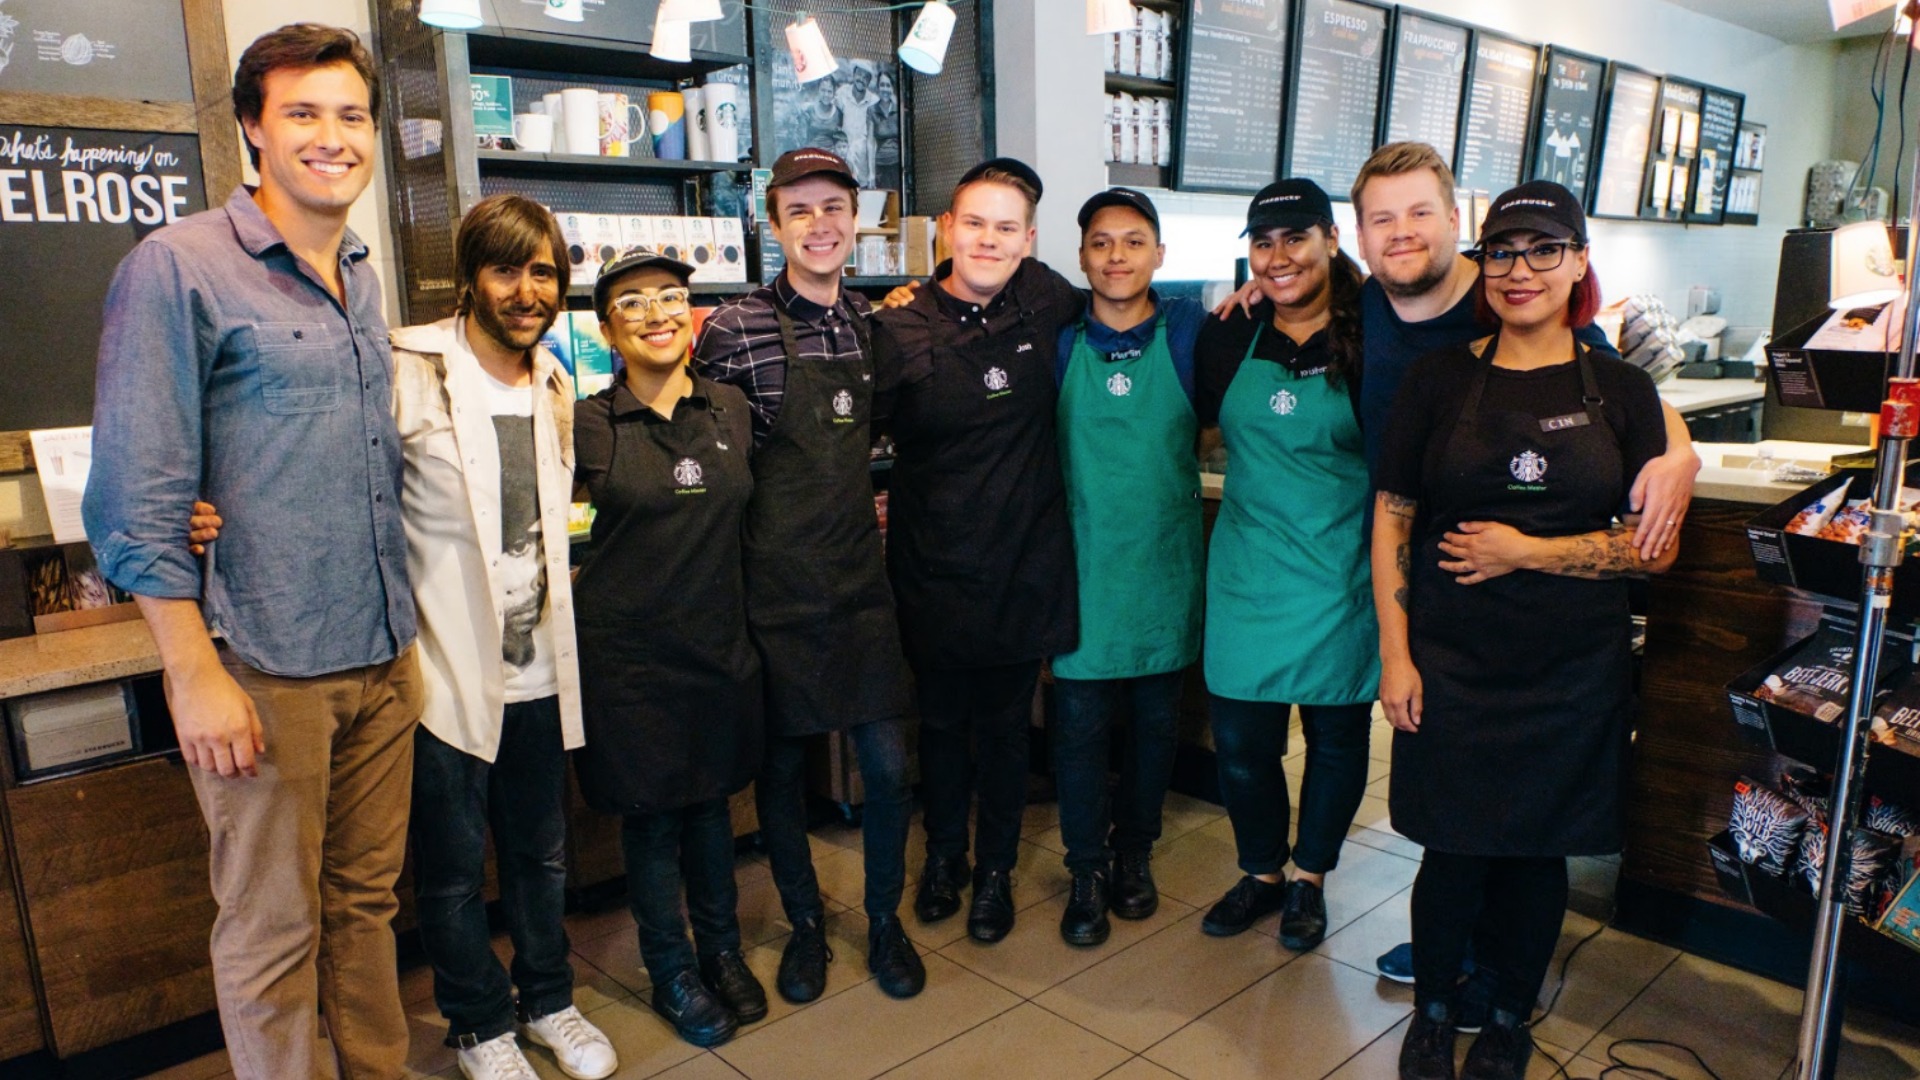 Thank you to the amazing Starbucks crew for putting up with our shenanigans!